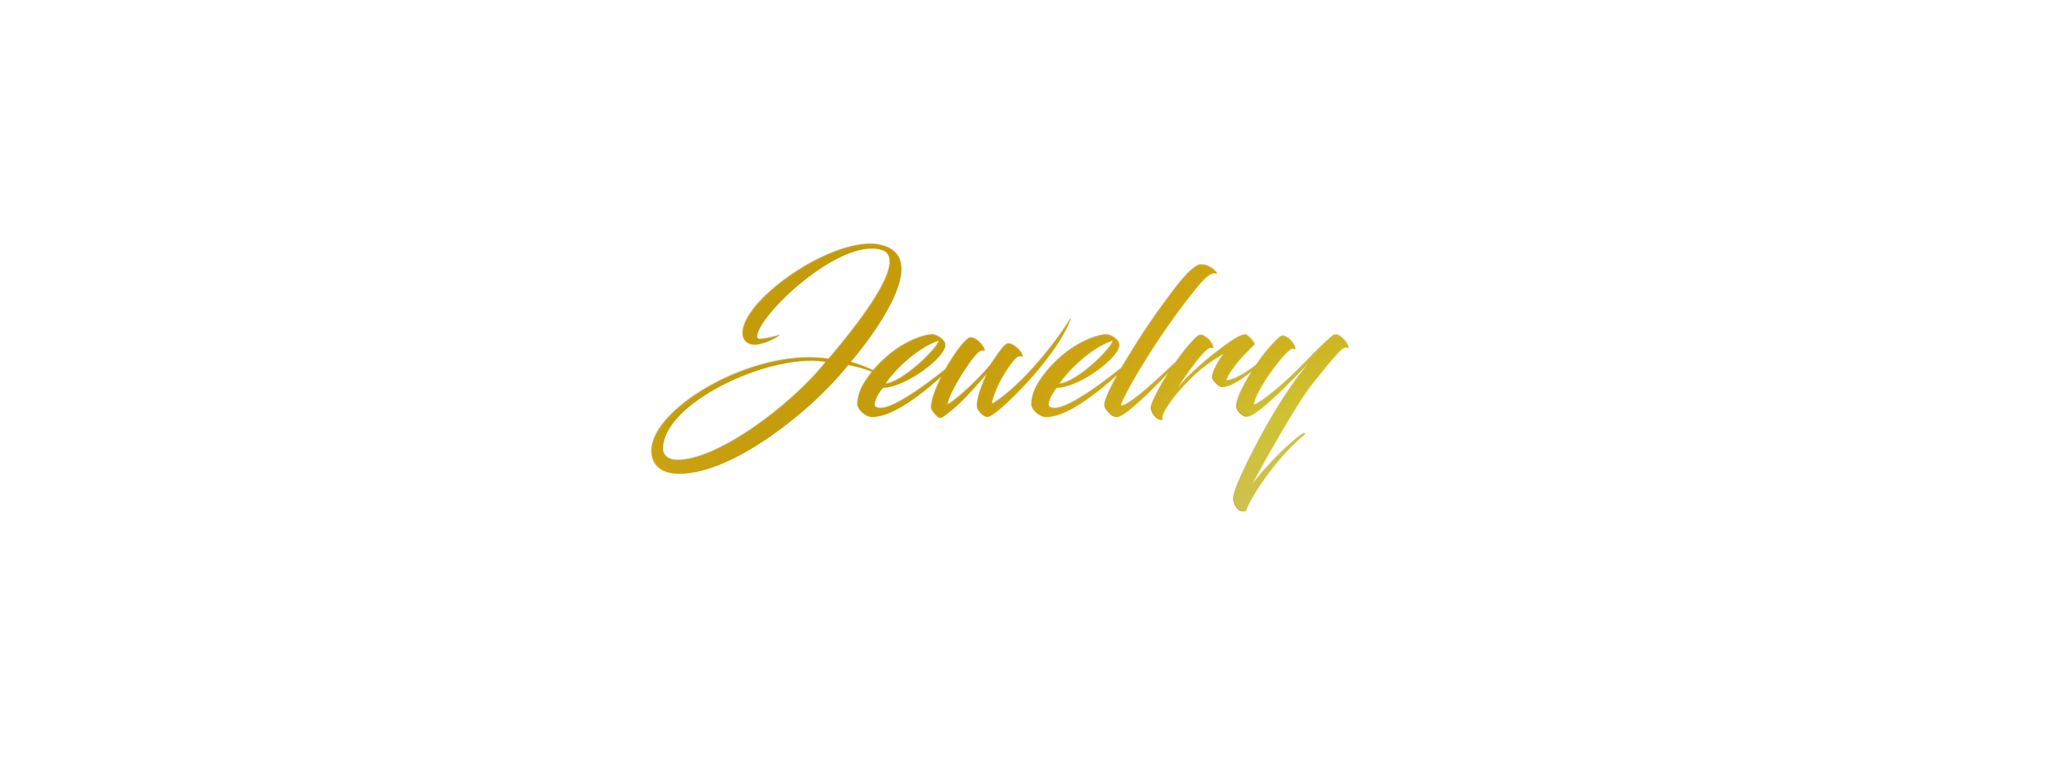 Gold Jewelry Lettering Group